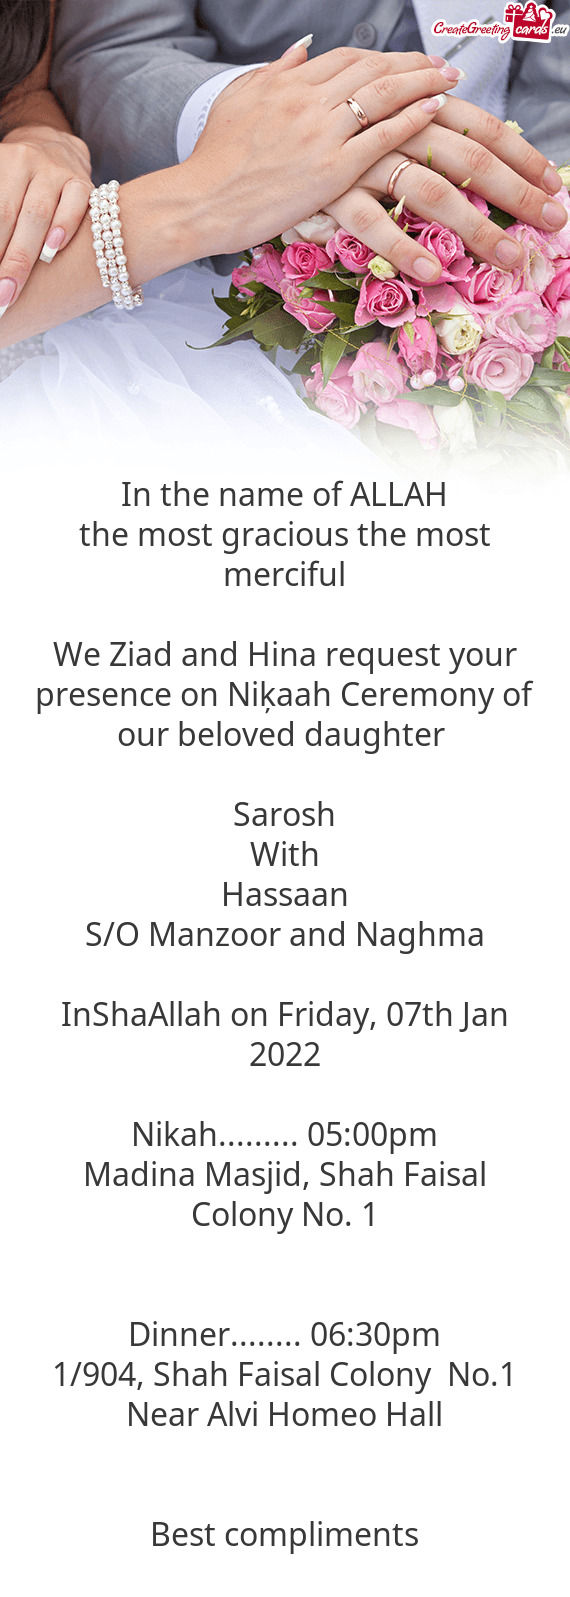 We Ziad and Hina request your presence on Niķaah Ceremony of our beloved daughter